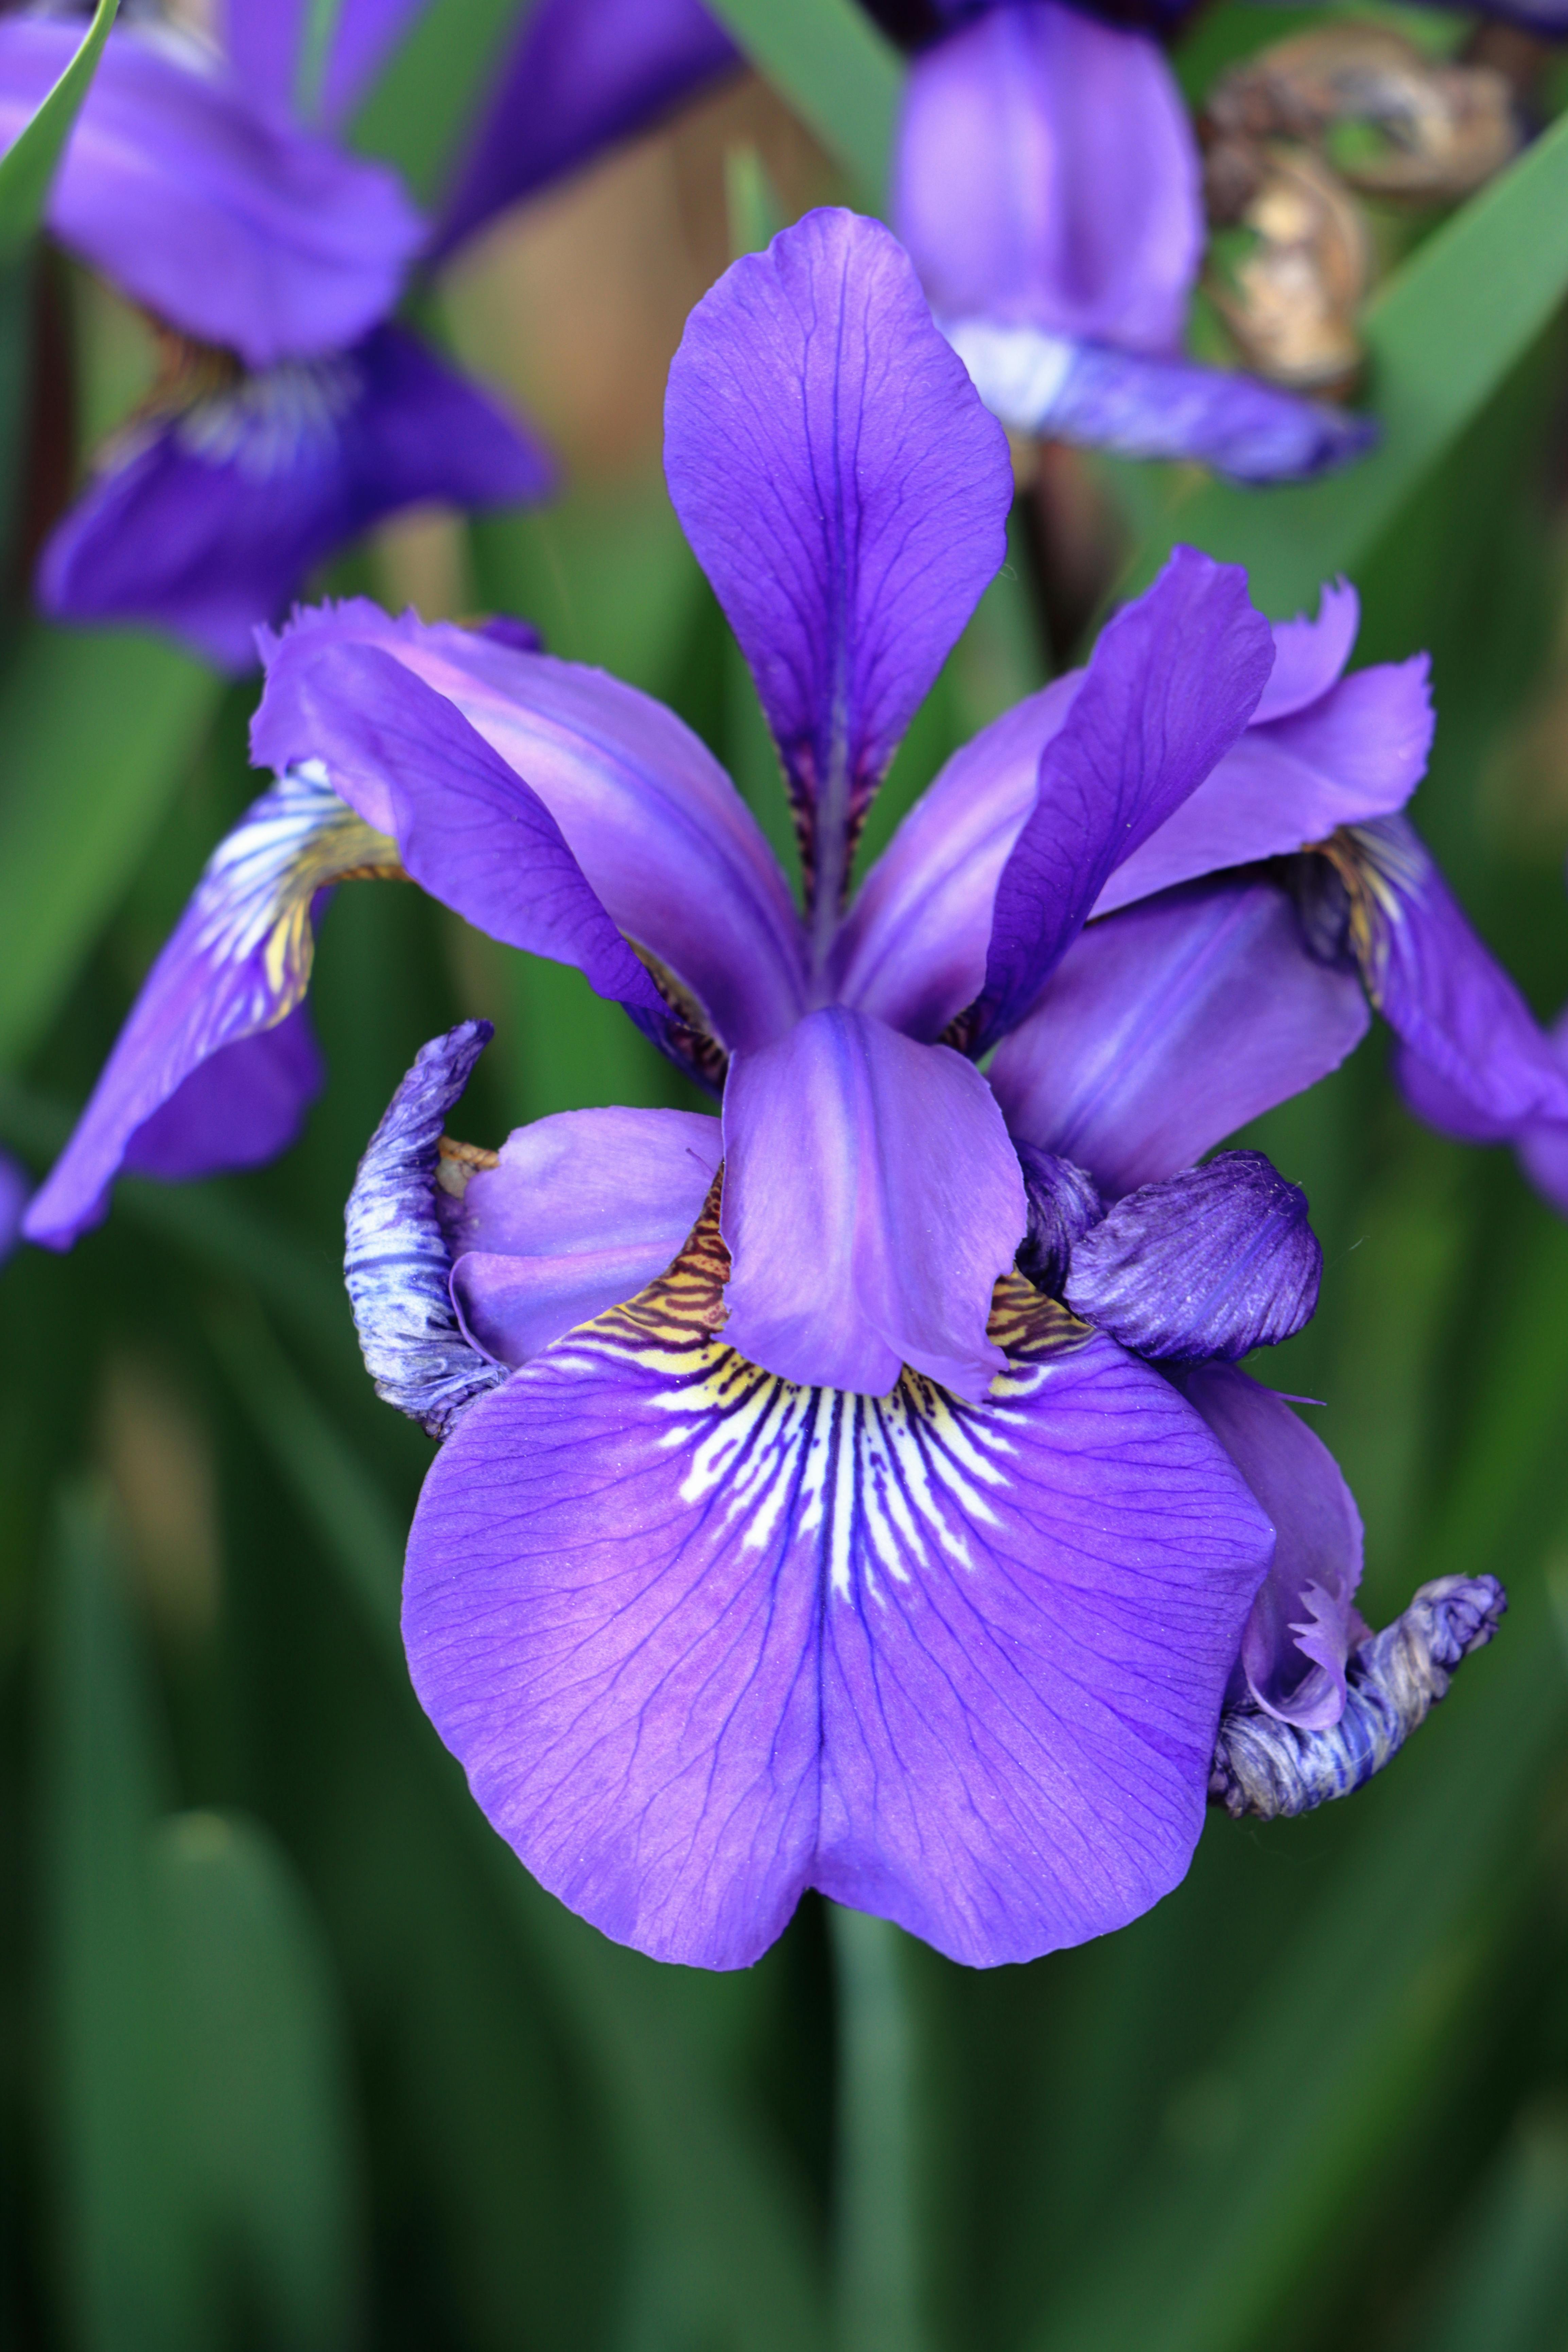 Iris Photos and Images & Pictures